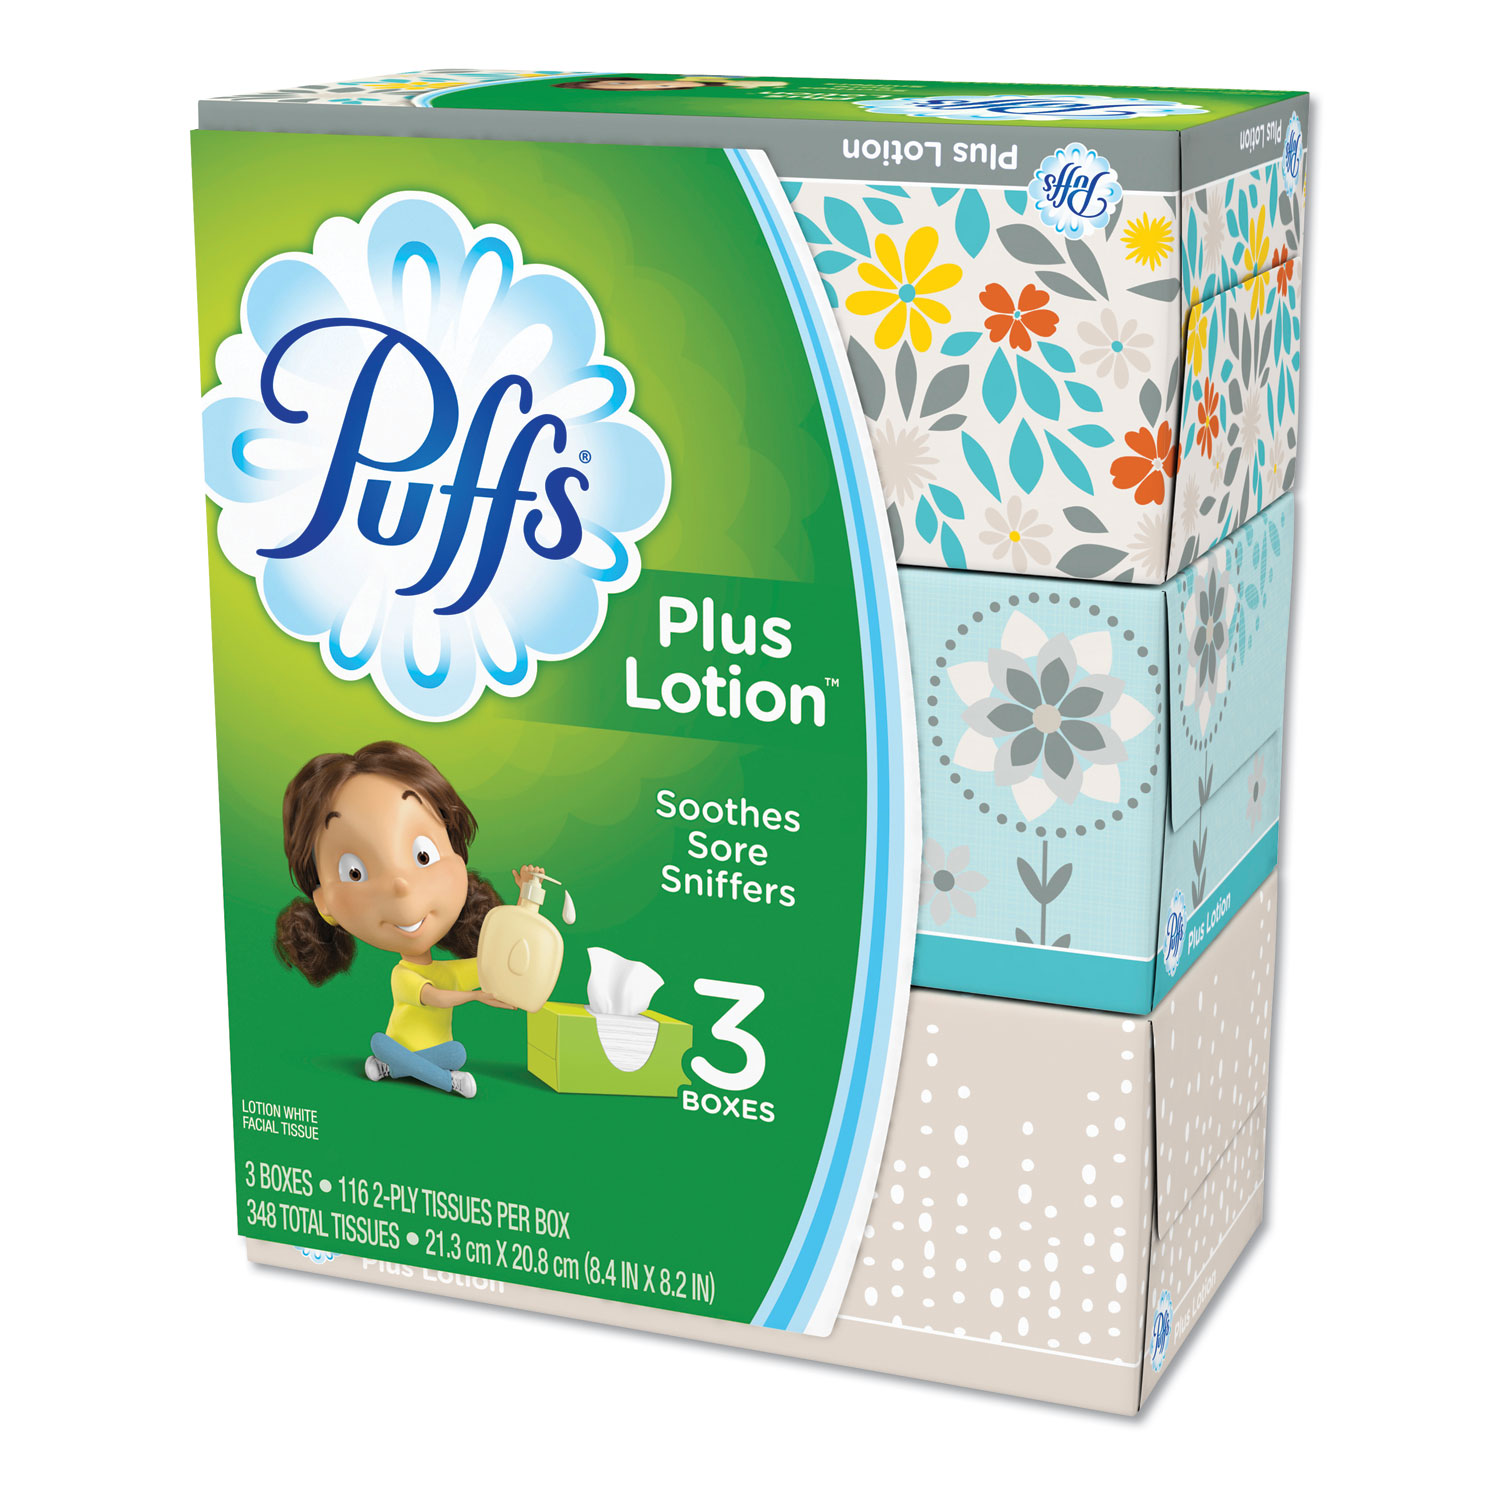  Puffs 82086CT Plus Lotion Facial Tissue, 2-Ply, White, 116 Sheets/Box, 3 Boxes/Pack, 8 Packs/Carton (PGC82086CT) 